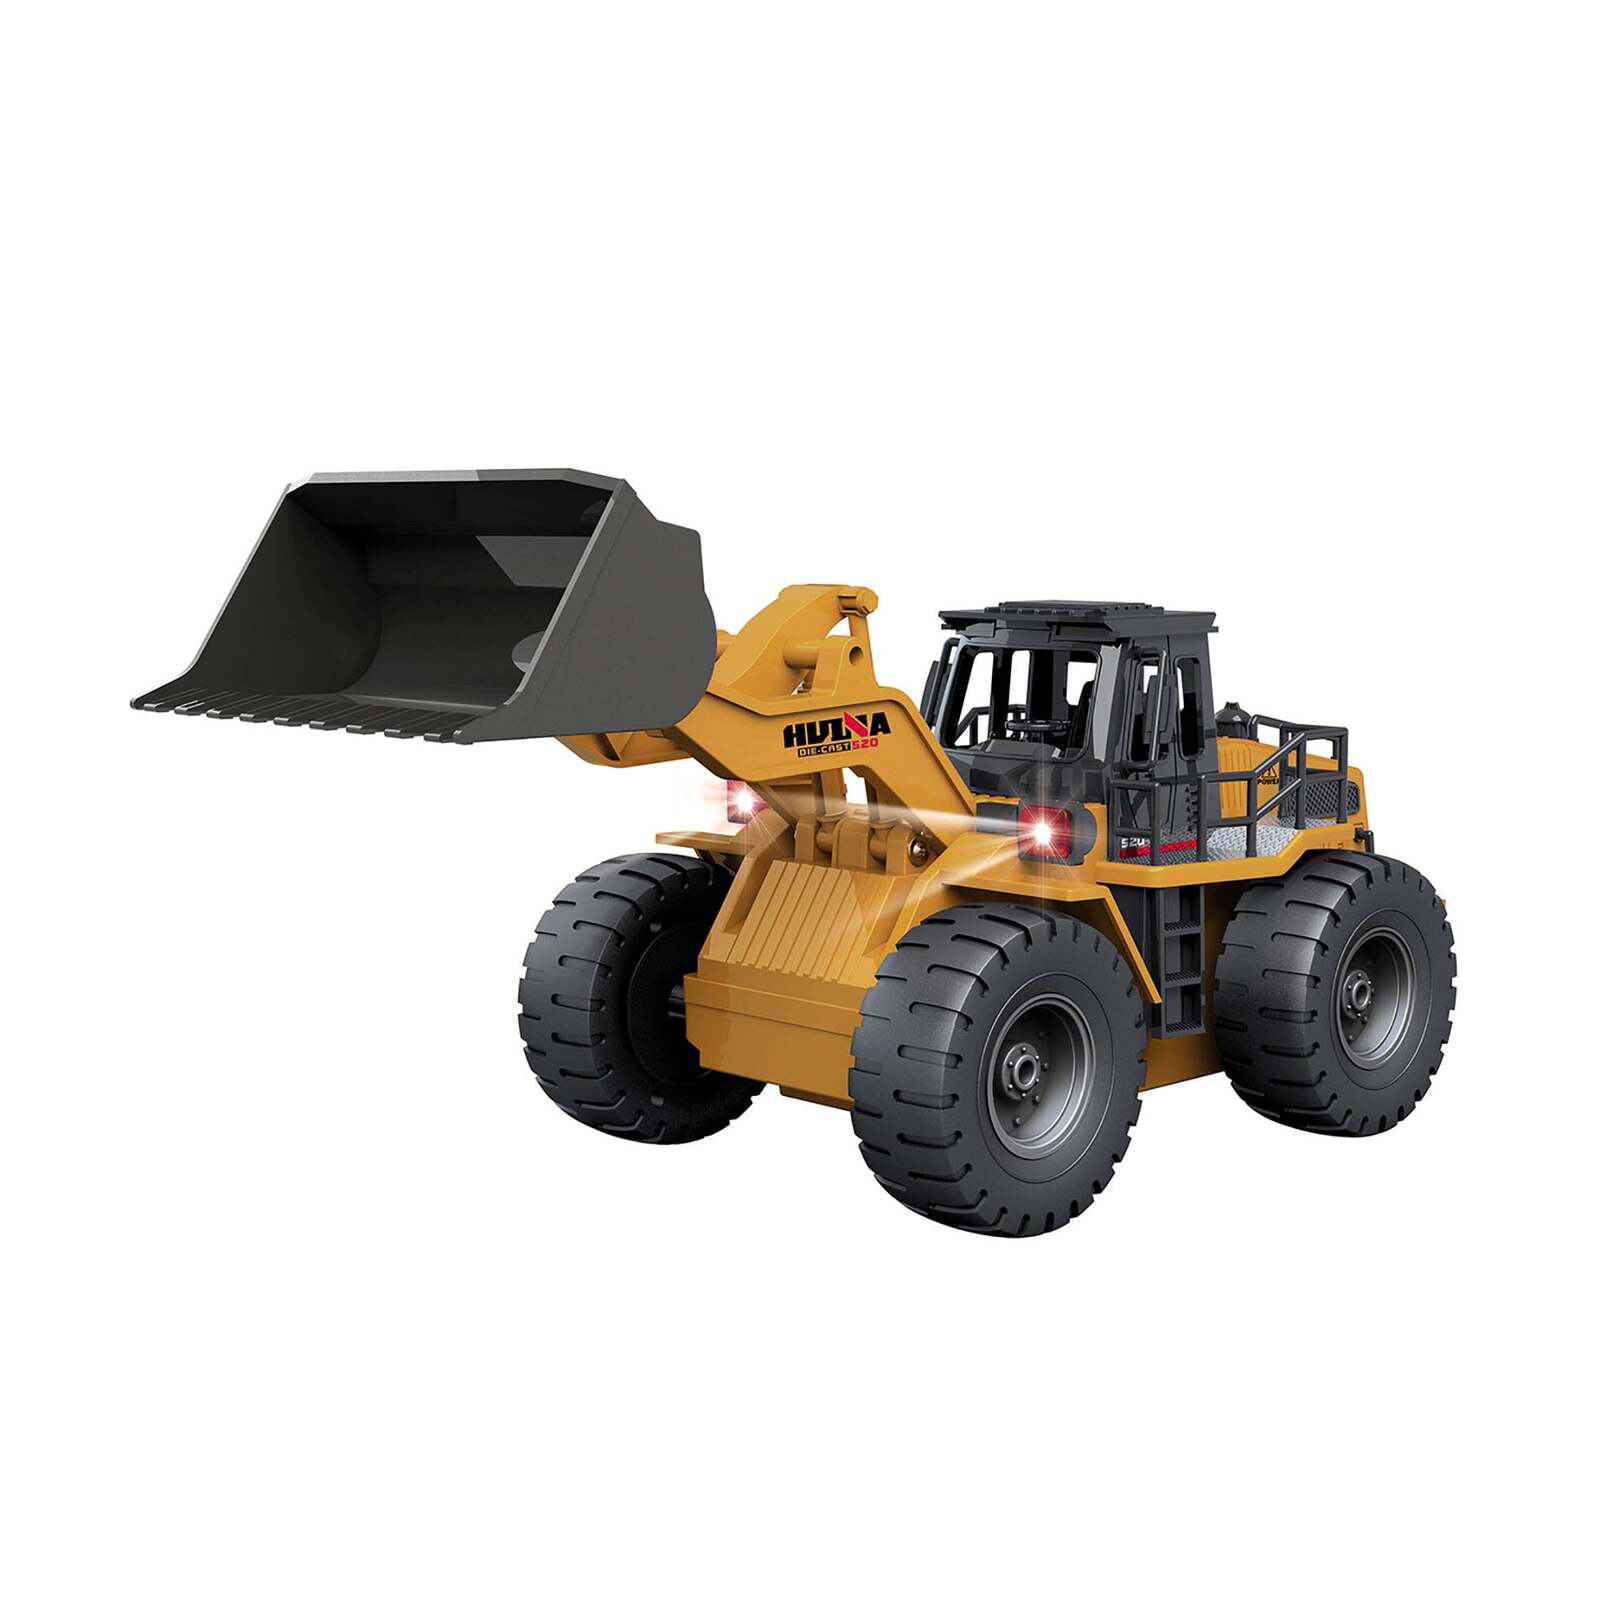 Lenoxx Remote Control Model Bulldozer Truck (Yellow), Driving Cab and Scoop